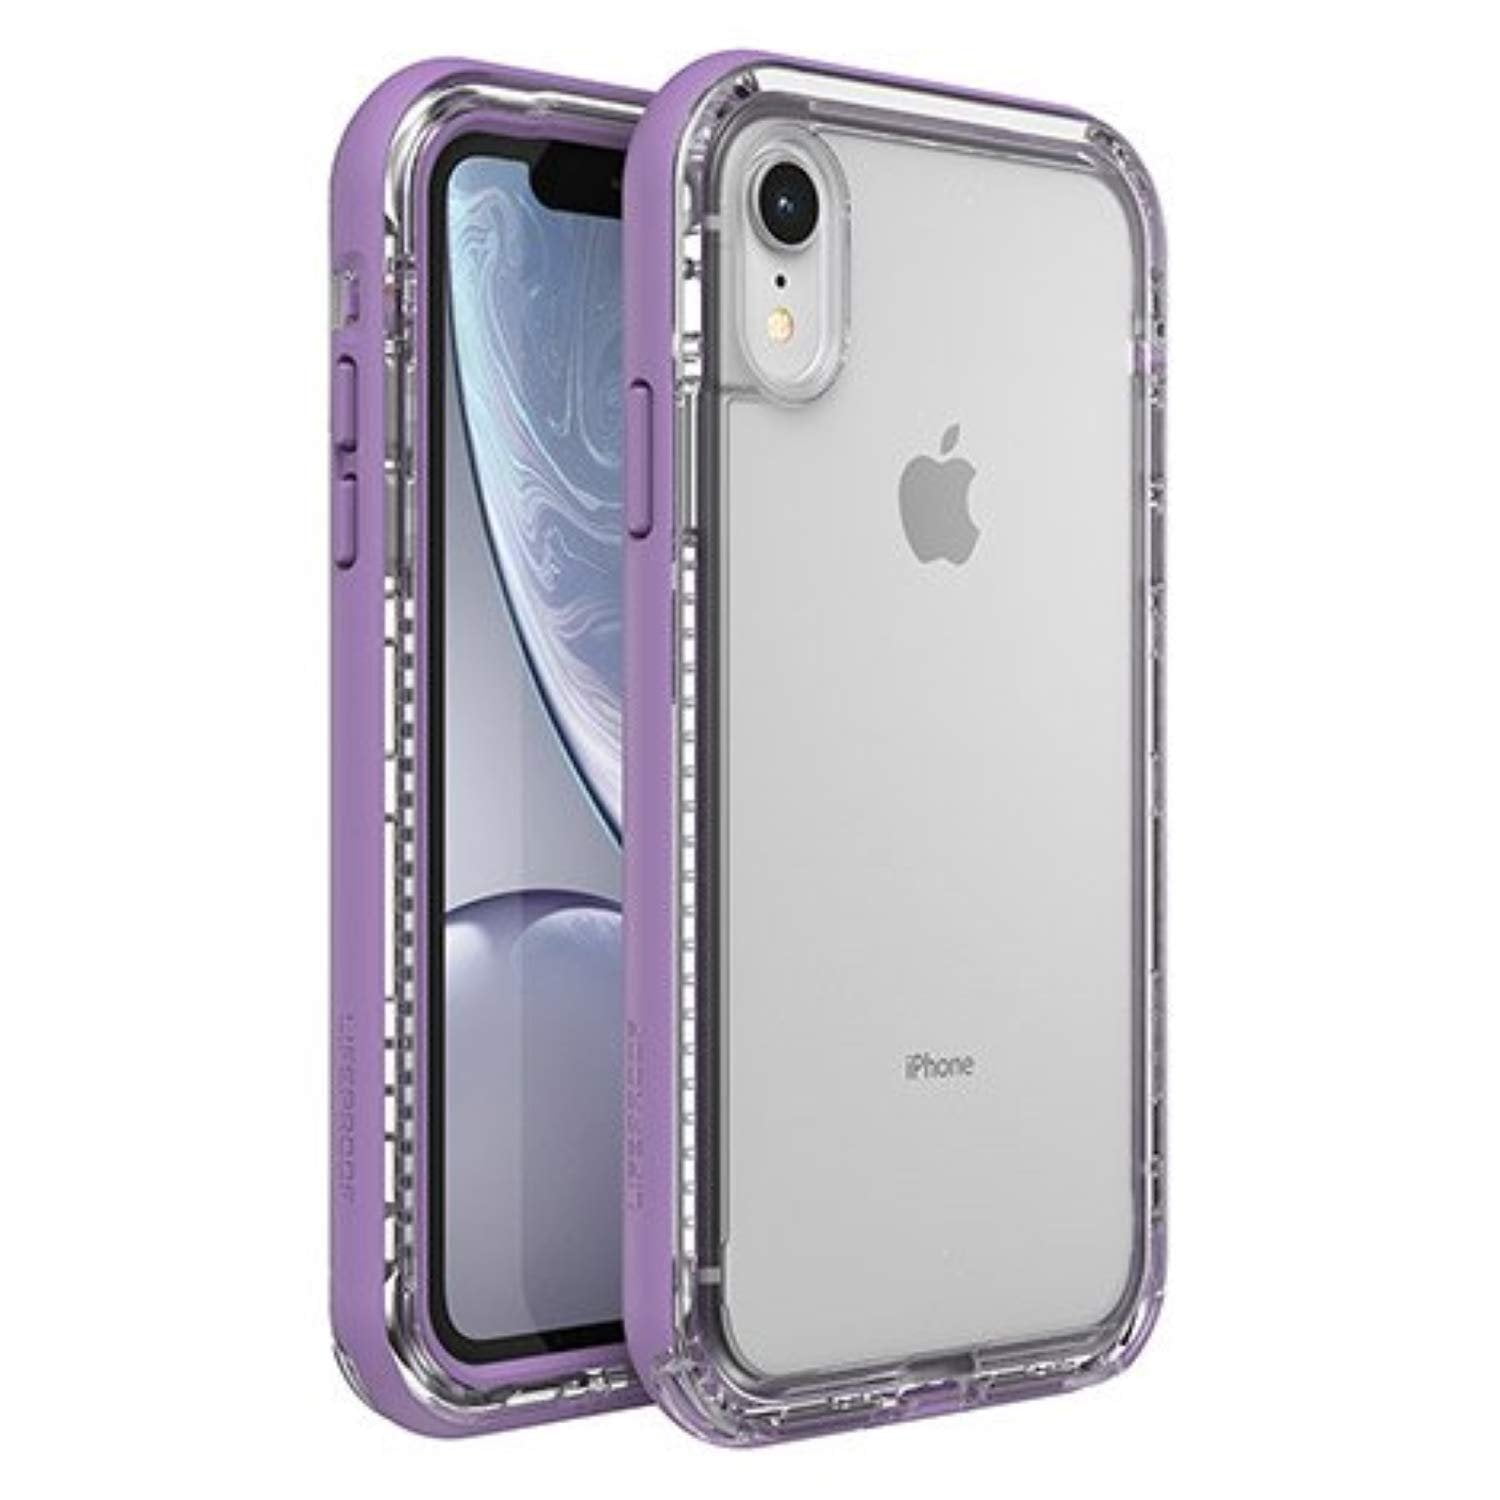 Lifeproof Next Series Case for iPhone XR - Bulk Packaging - Ultra (Clear/Lavender)